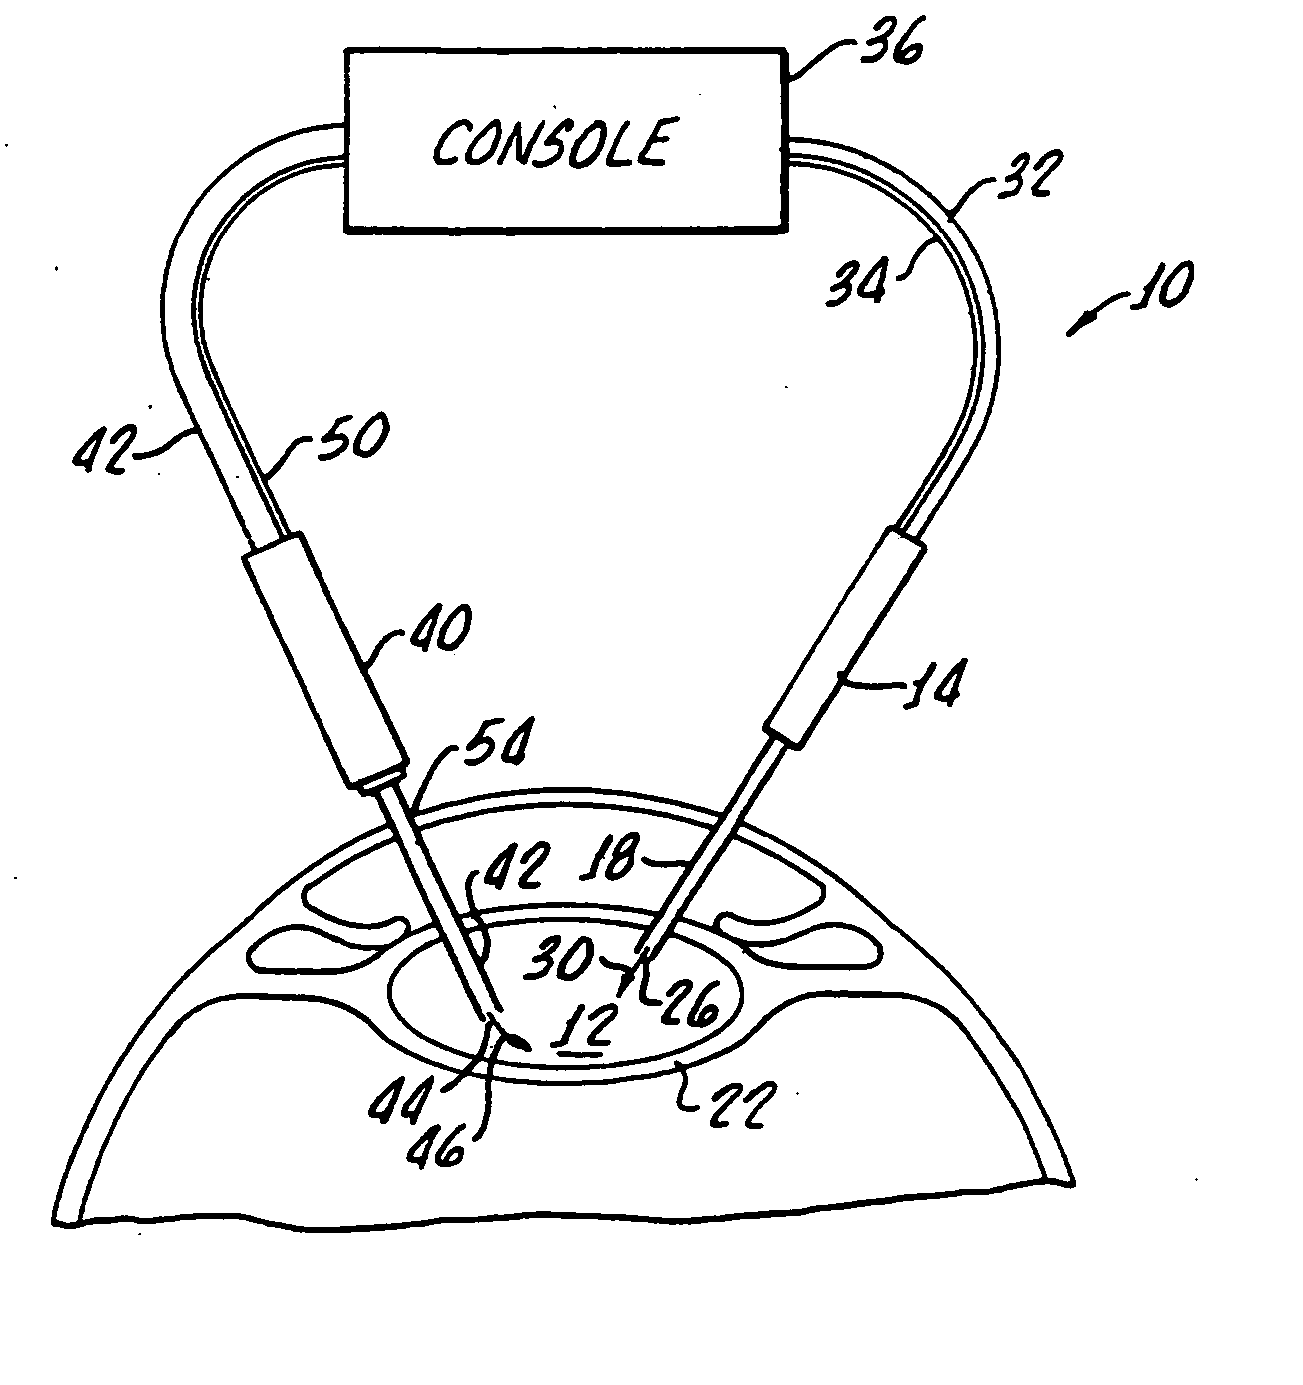 Cataract extraction apparatus and method with rapid pulse phaco power